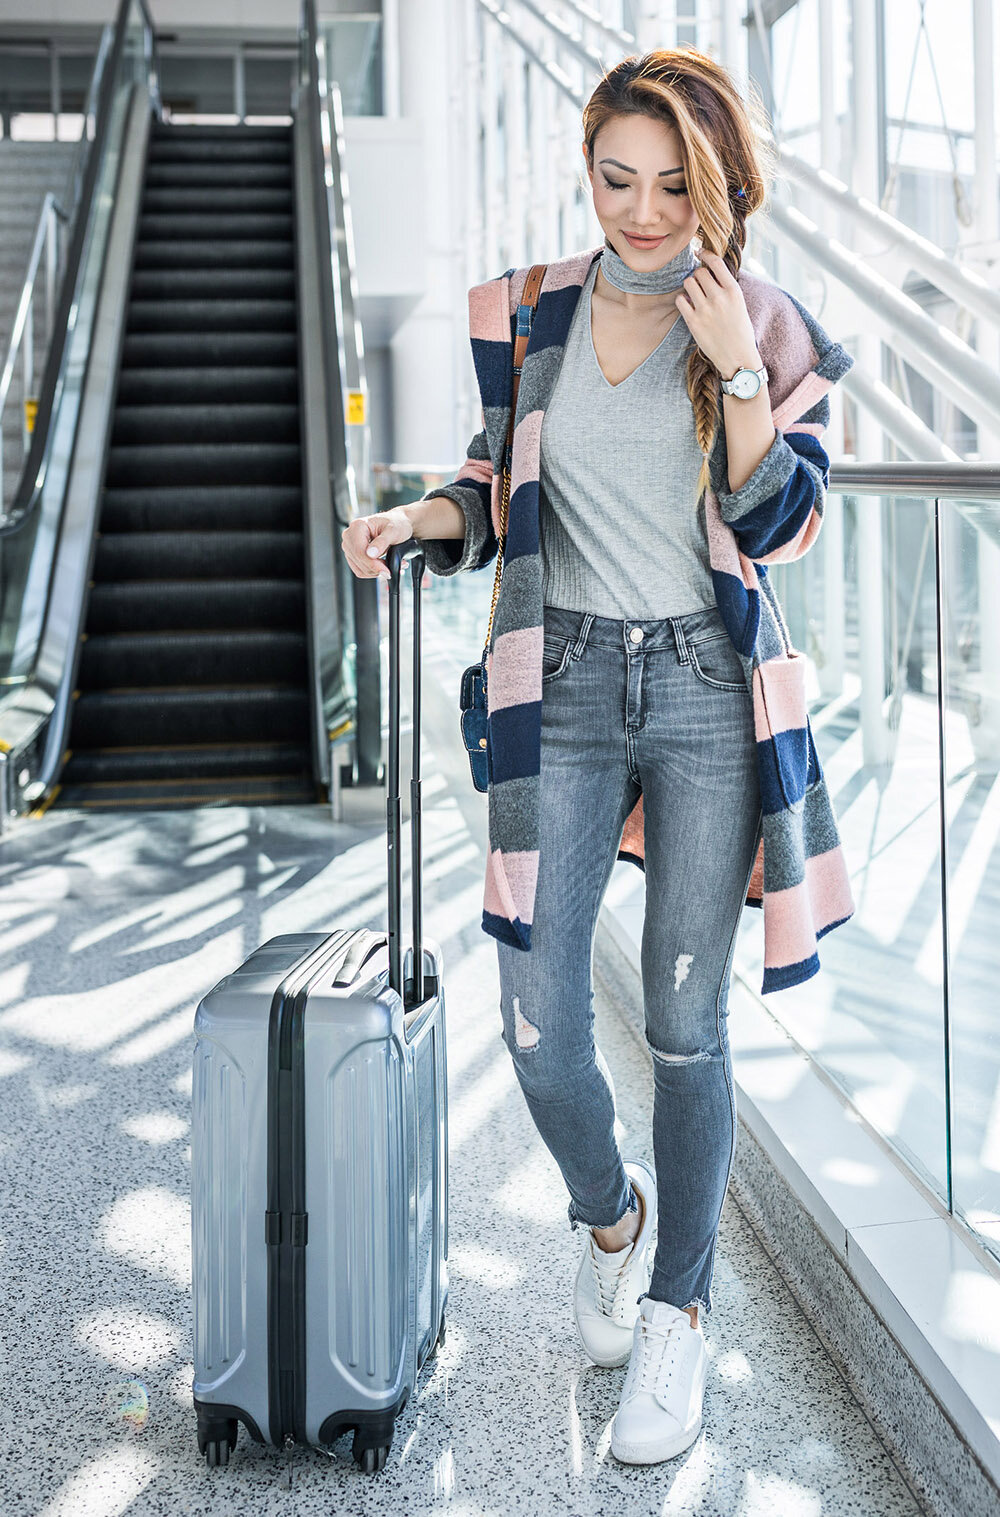 7-Essentials-for-Comfy-Travel-Style-02.jpg